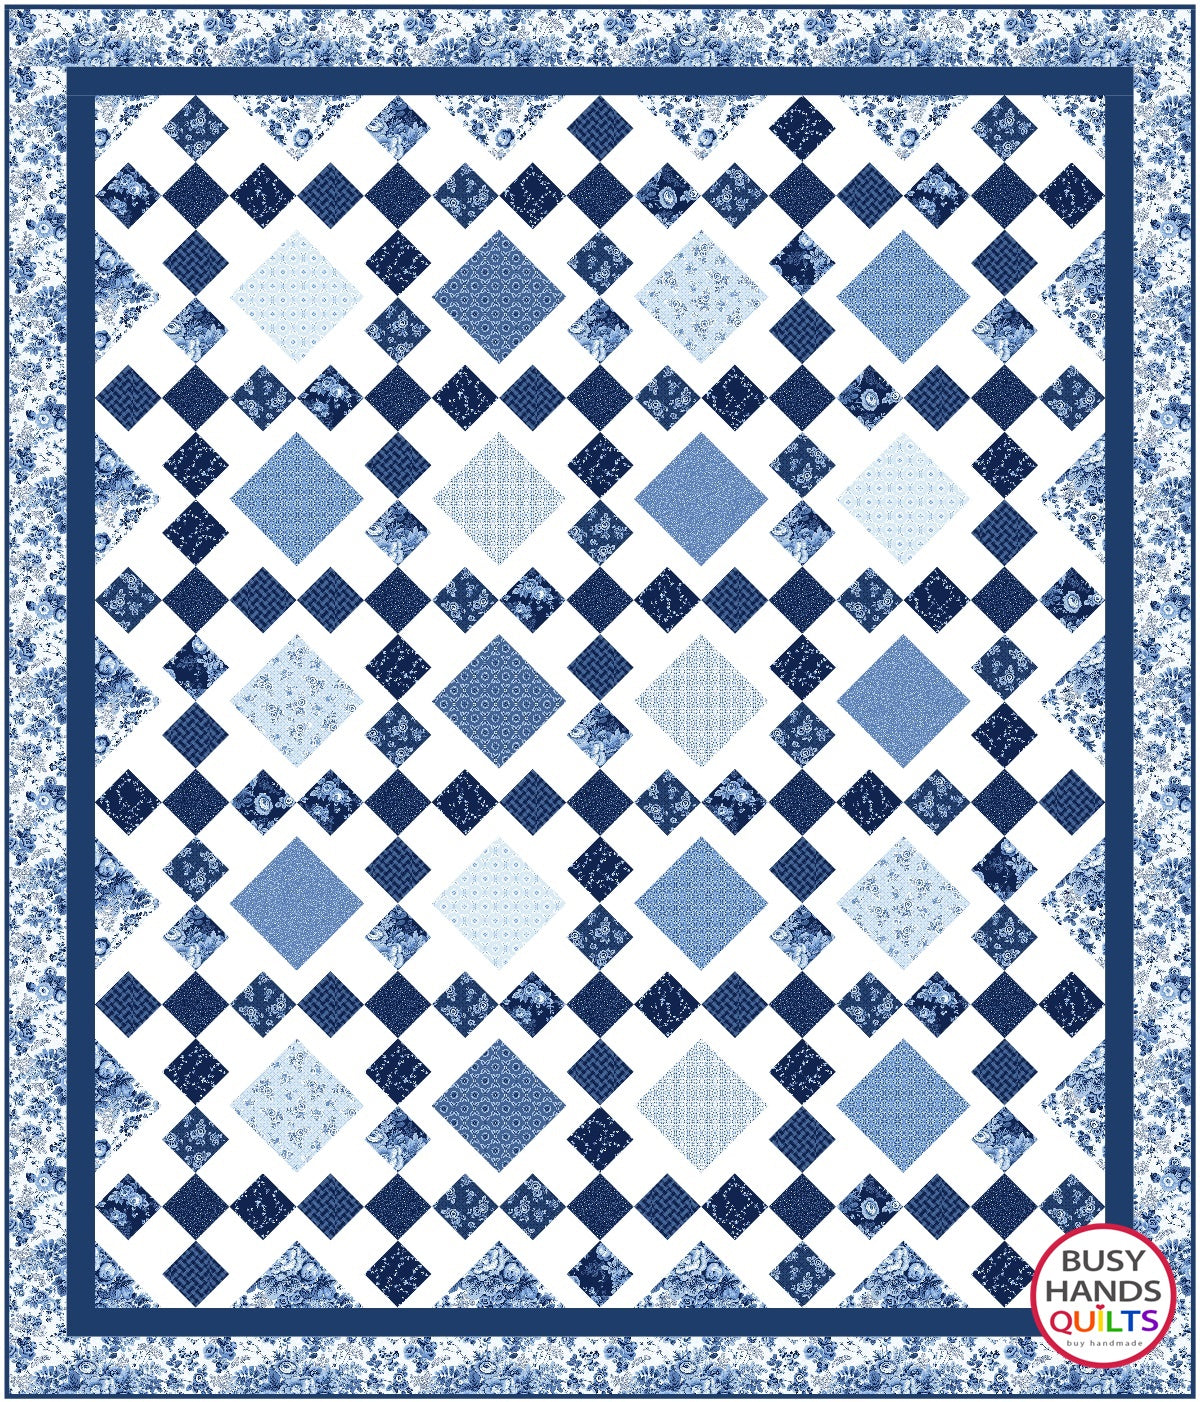 Granny's Square Patch Quilt Pattern PRINTED Busy Hands Quilts {$price}